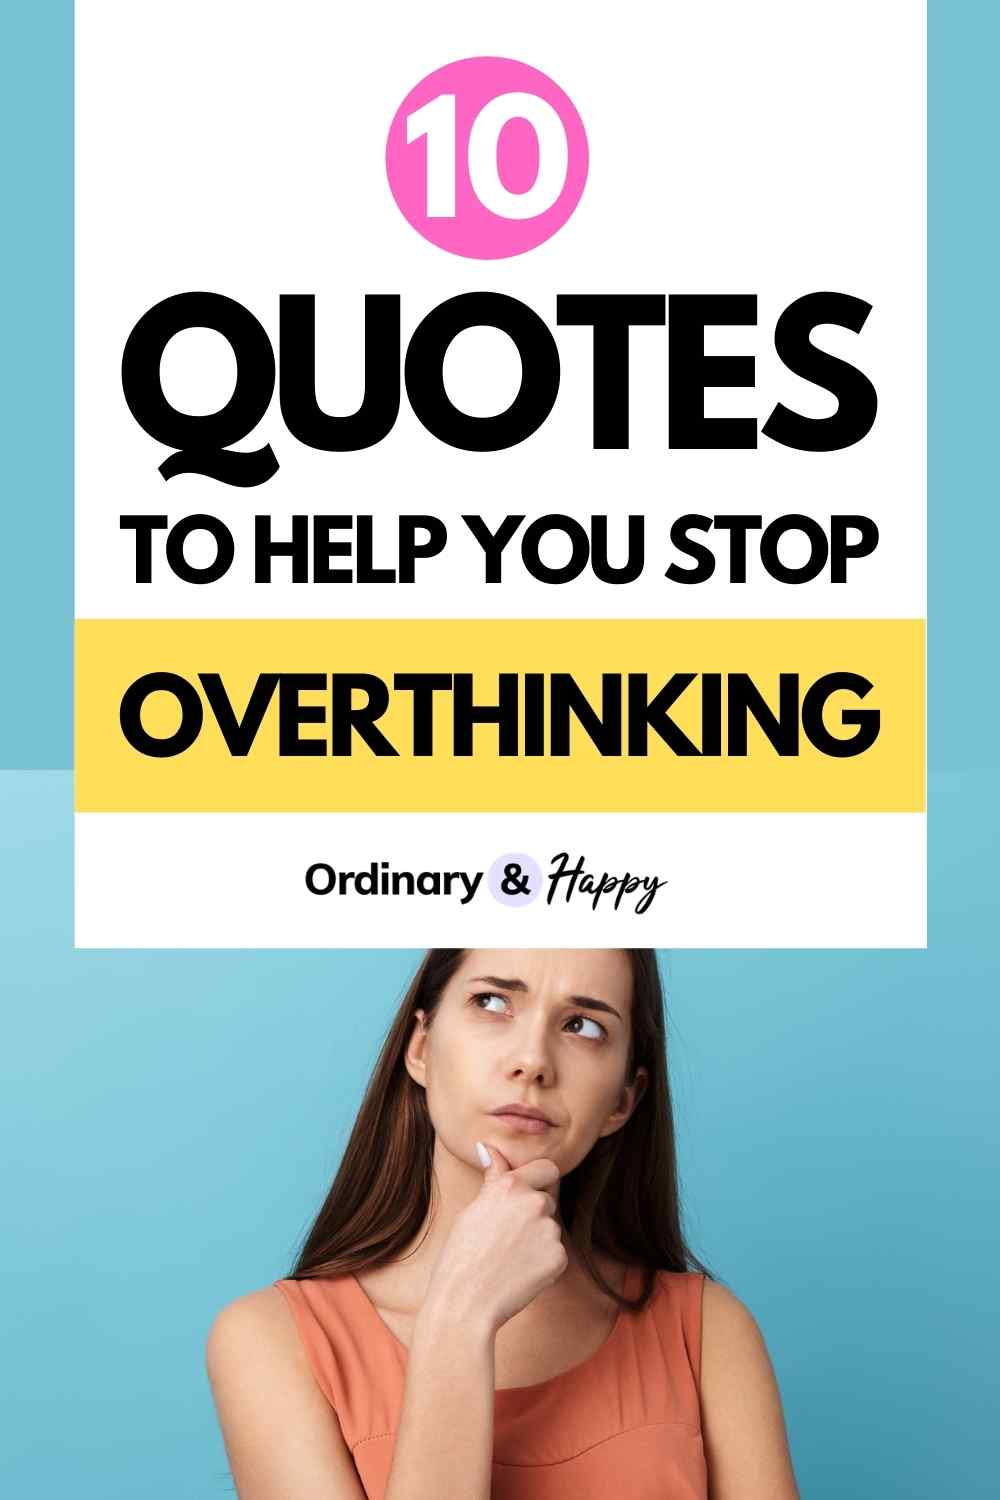 10 Quotes to Help You Stop Overthinking Image Pin